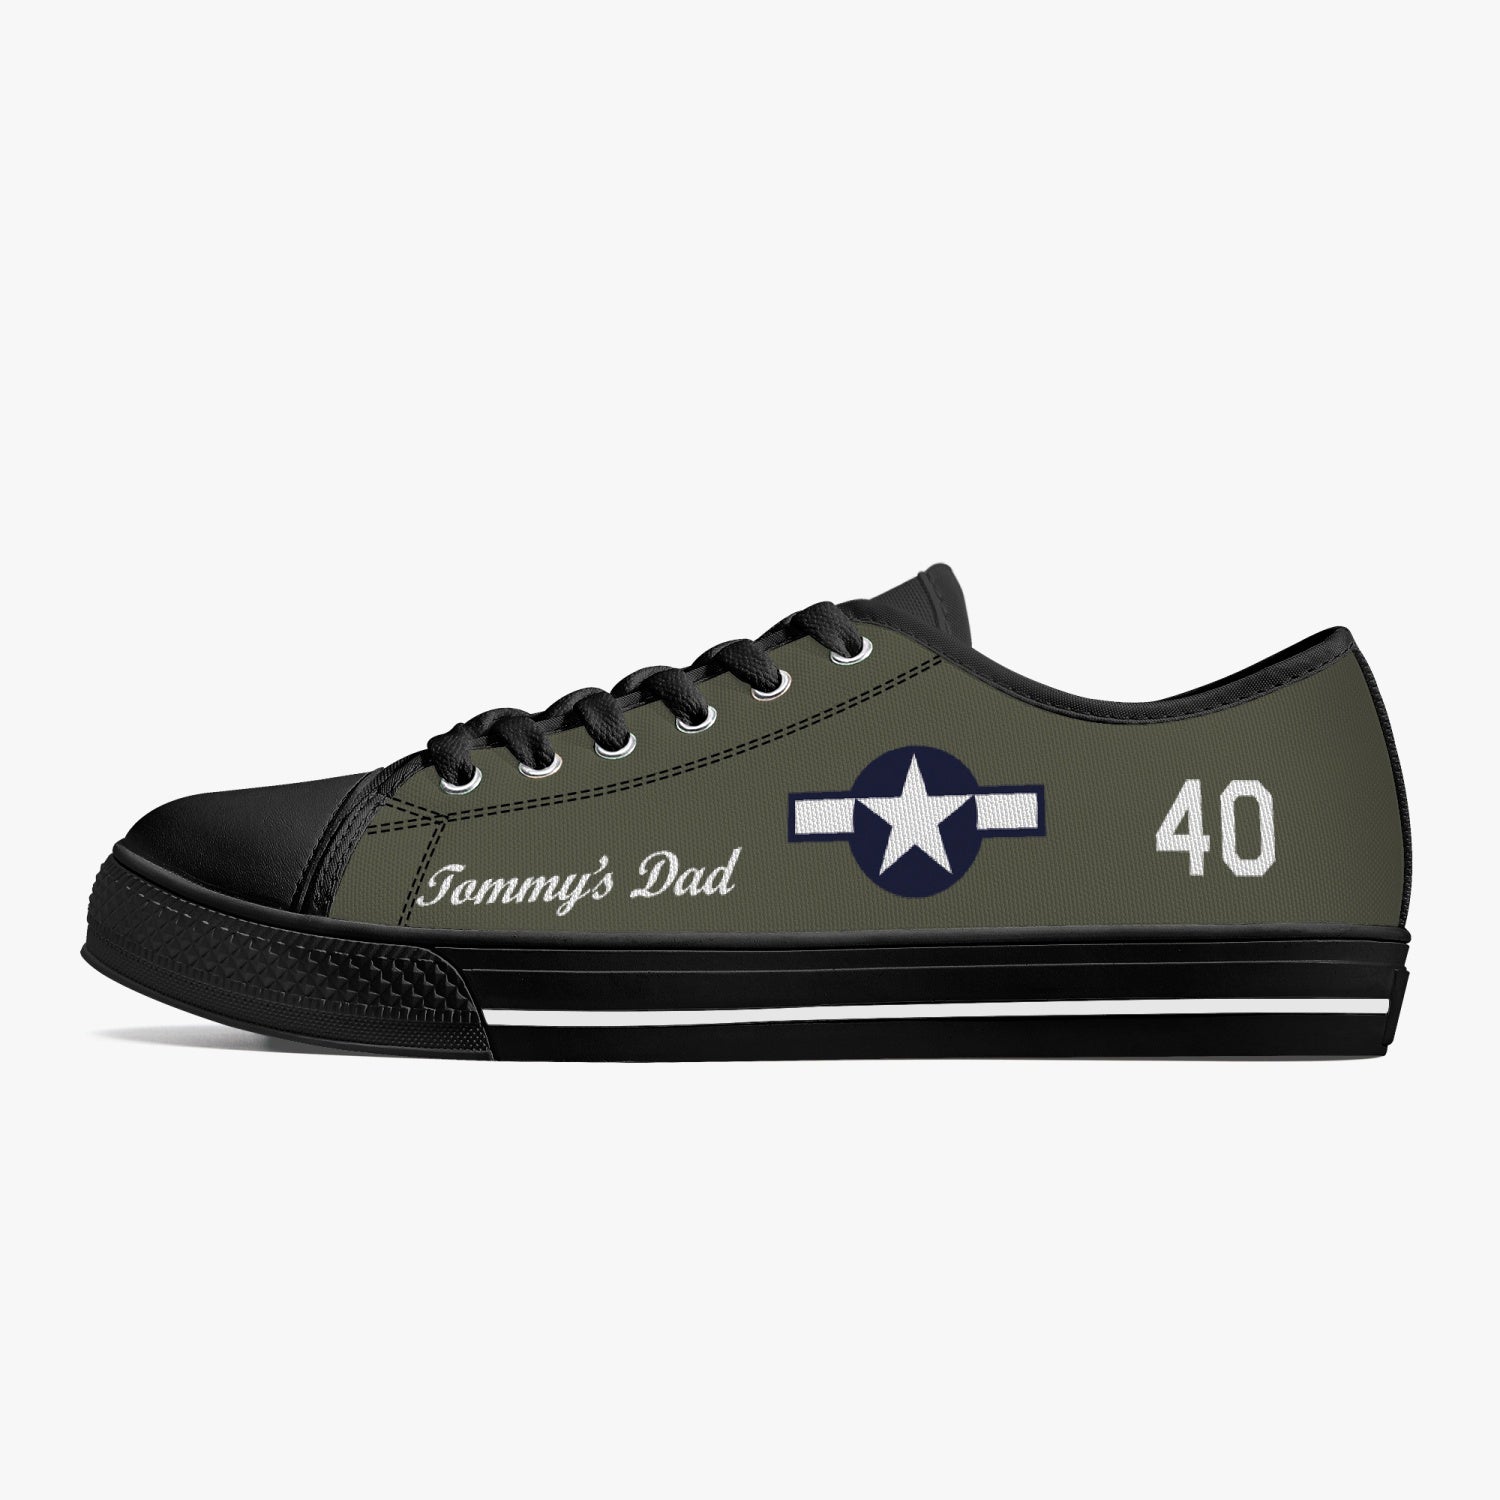 P-51 "Tommy's Dad" Low Top Canvas Shoes